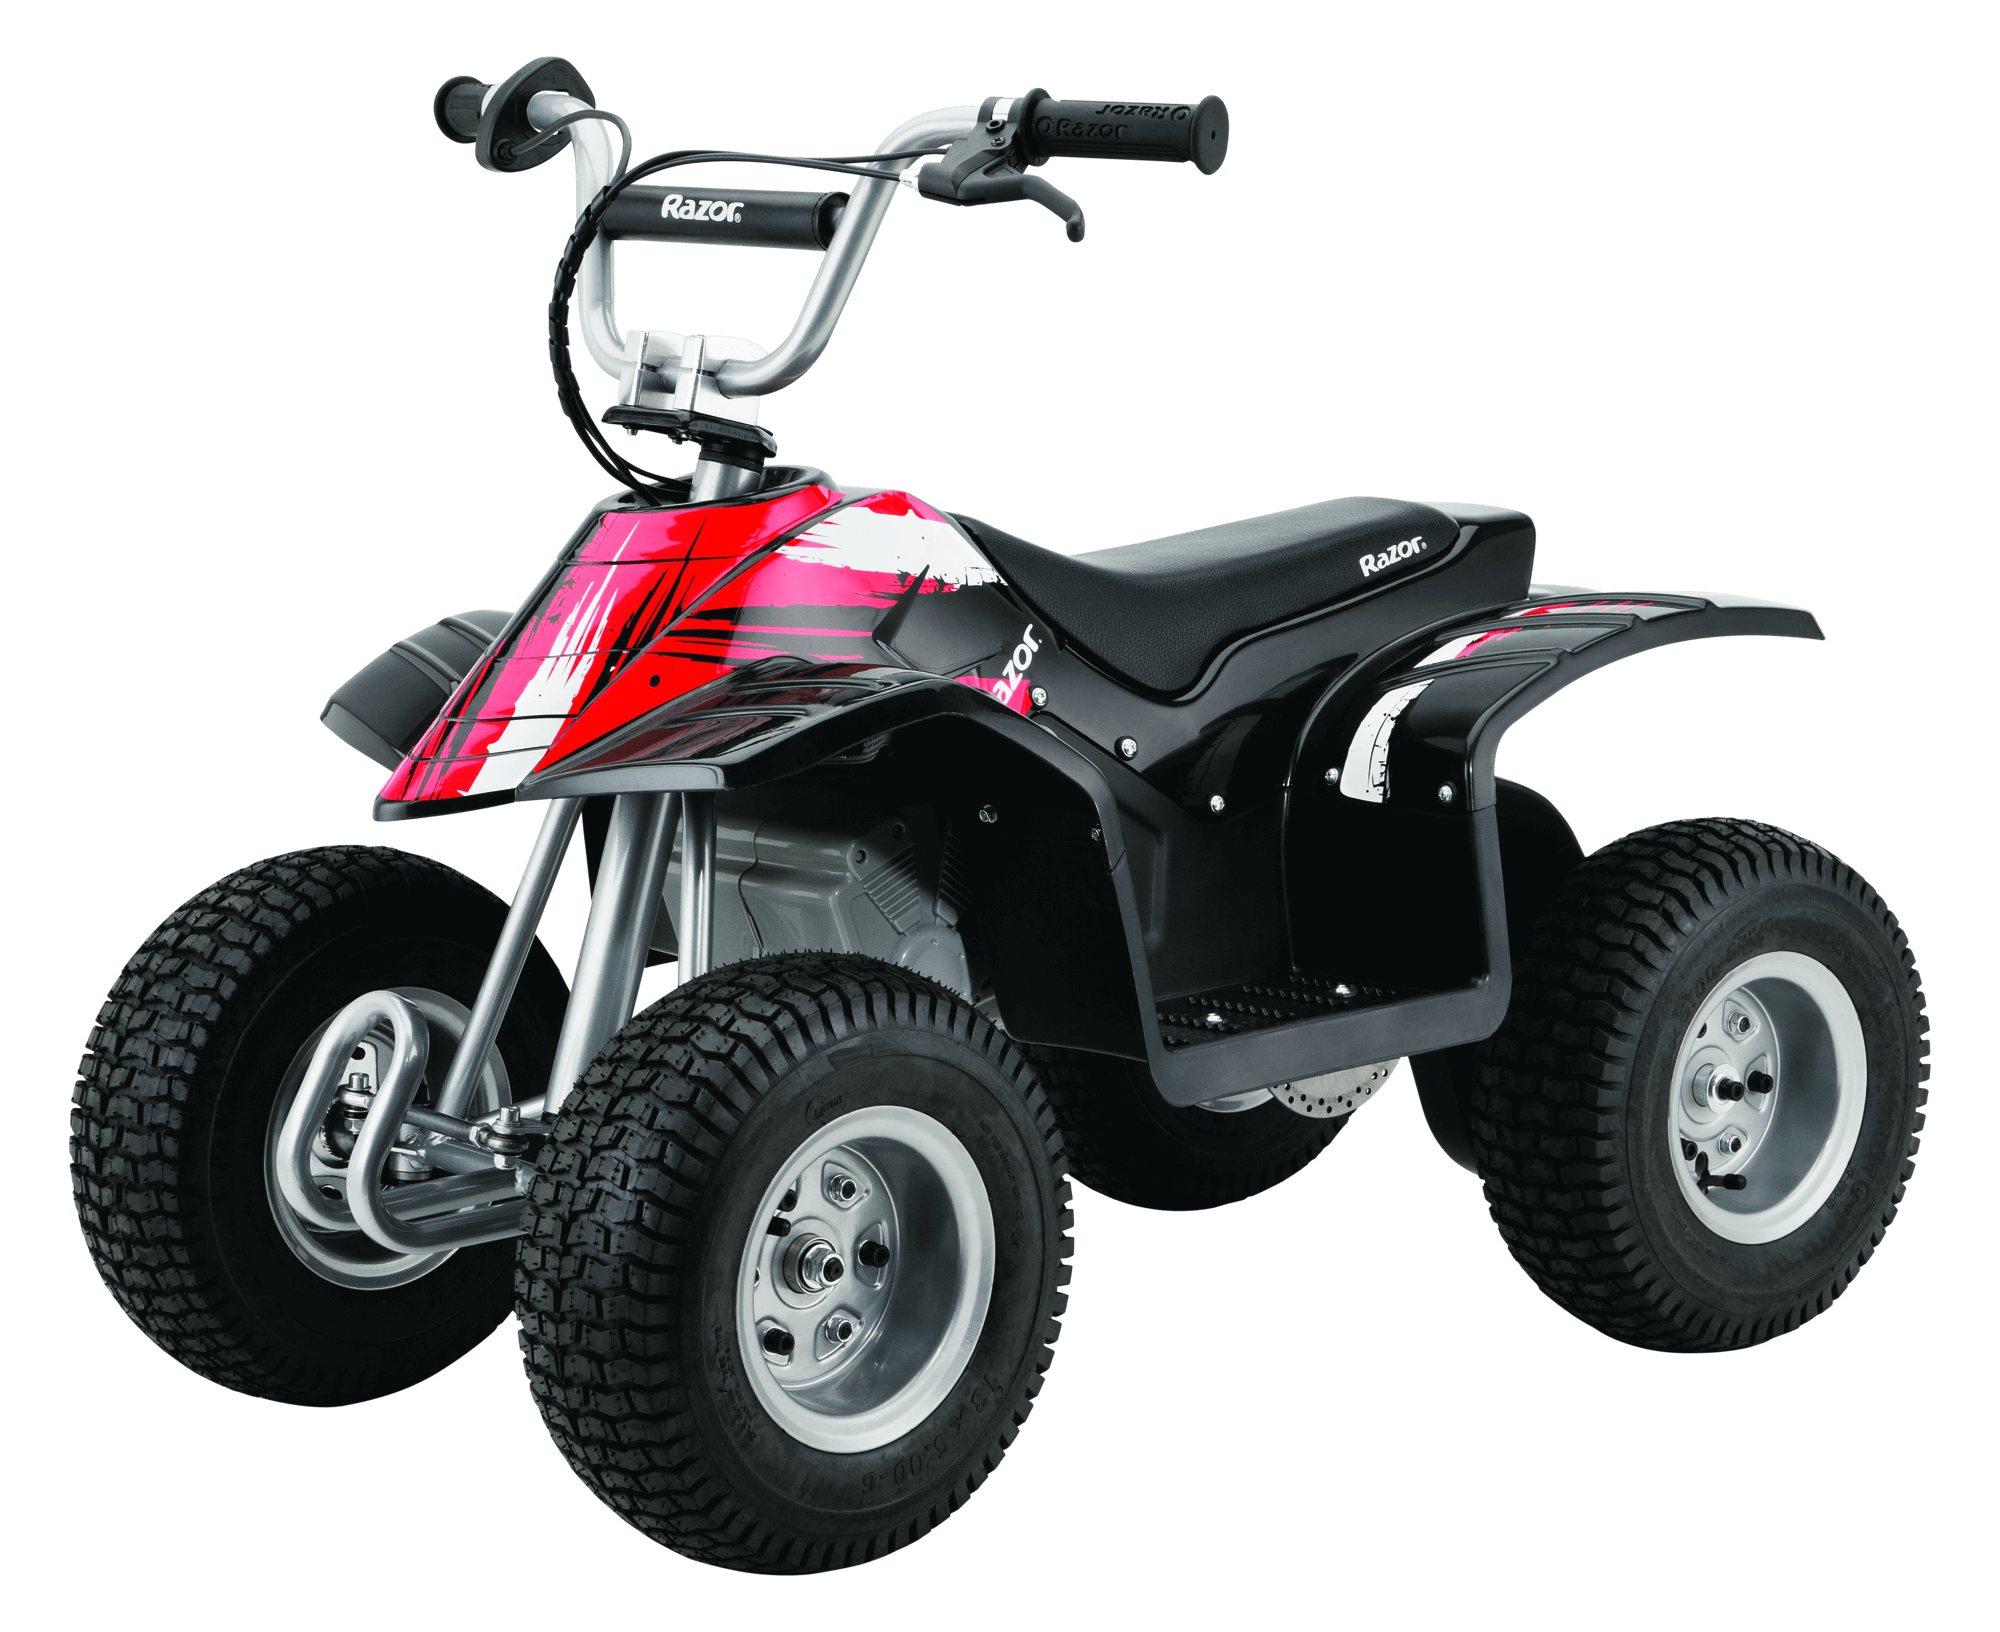 24 volt power wheels with rubber tires